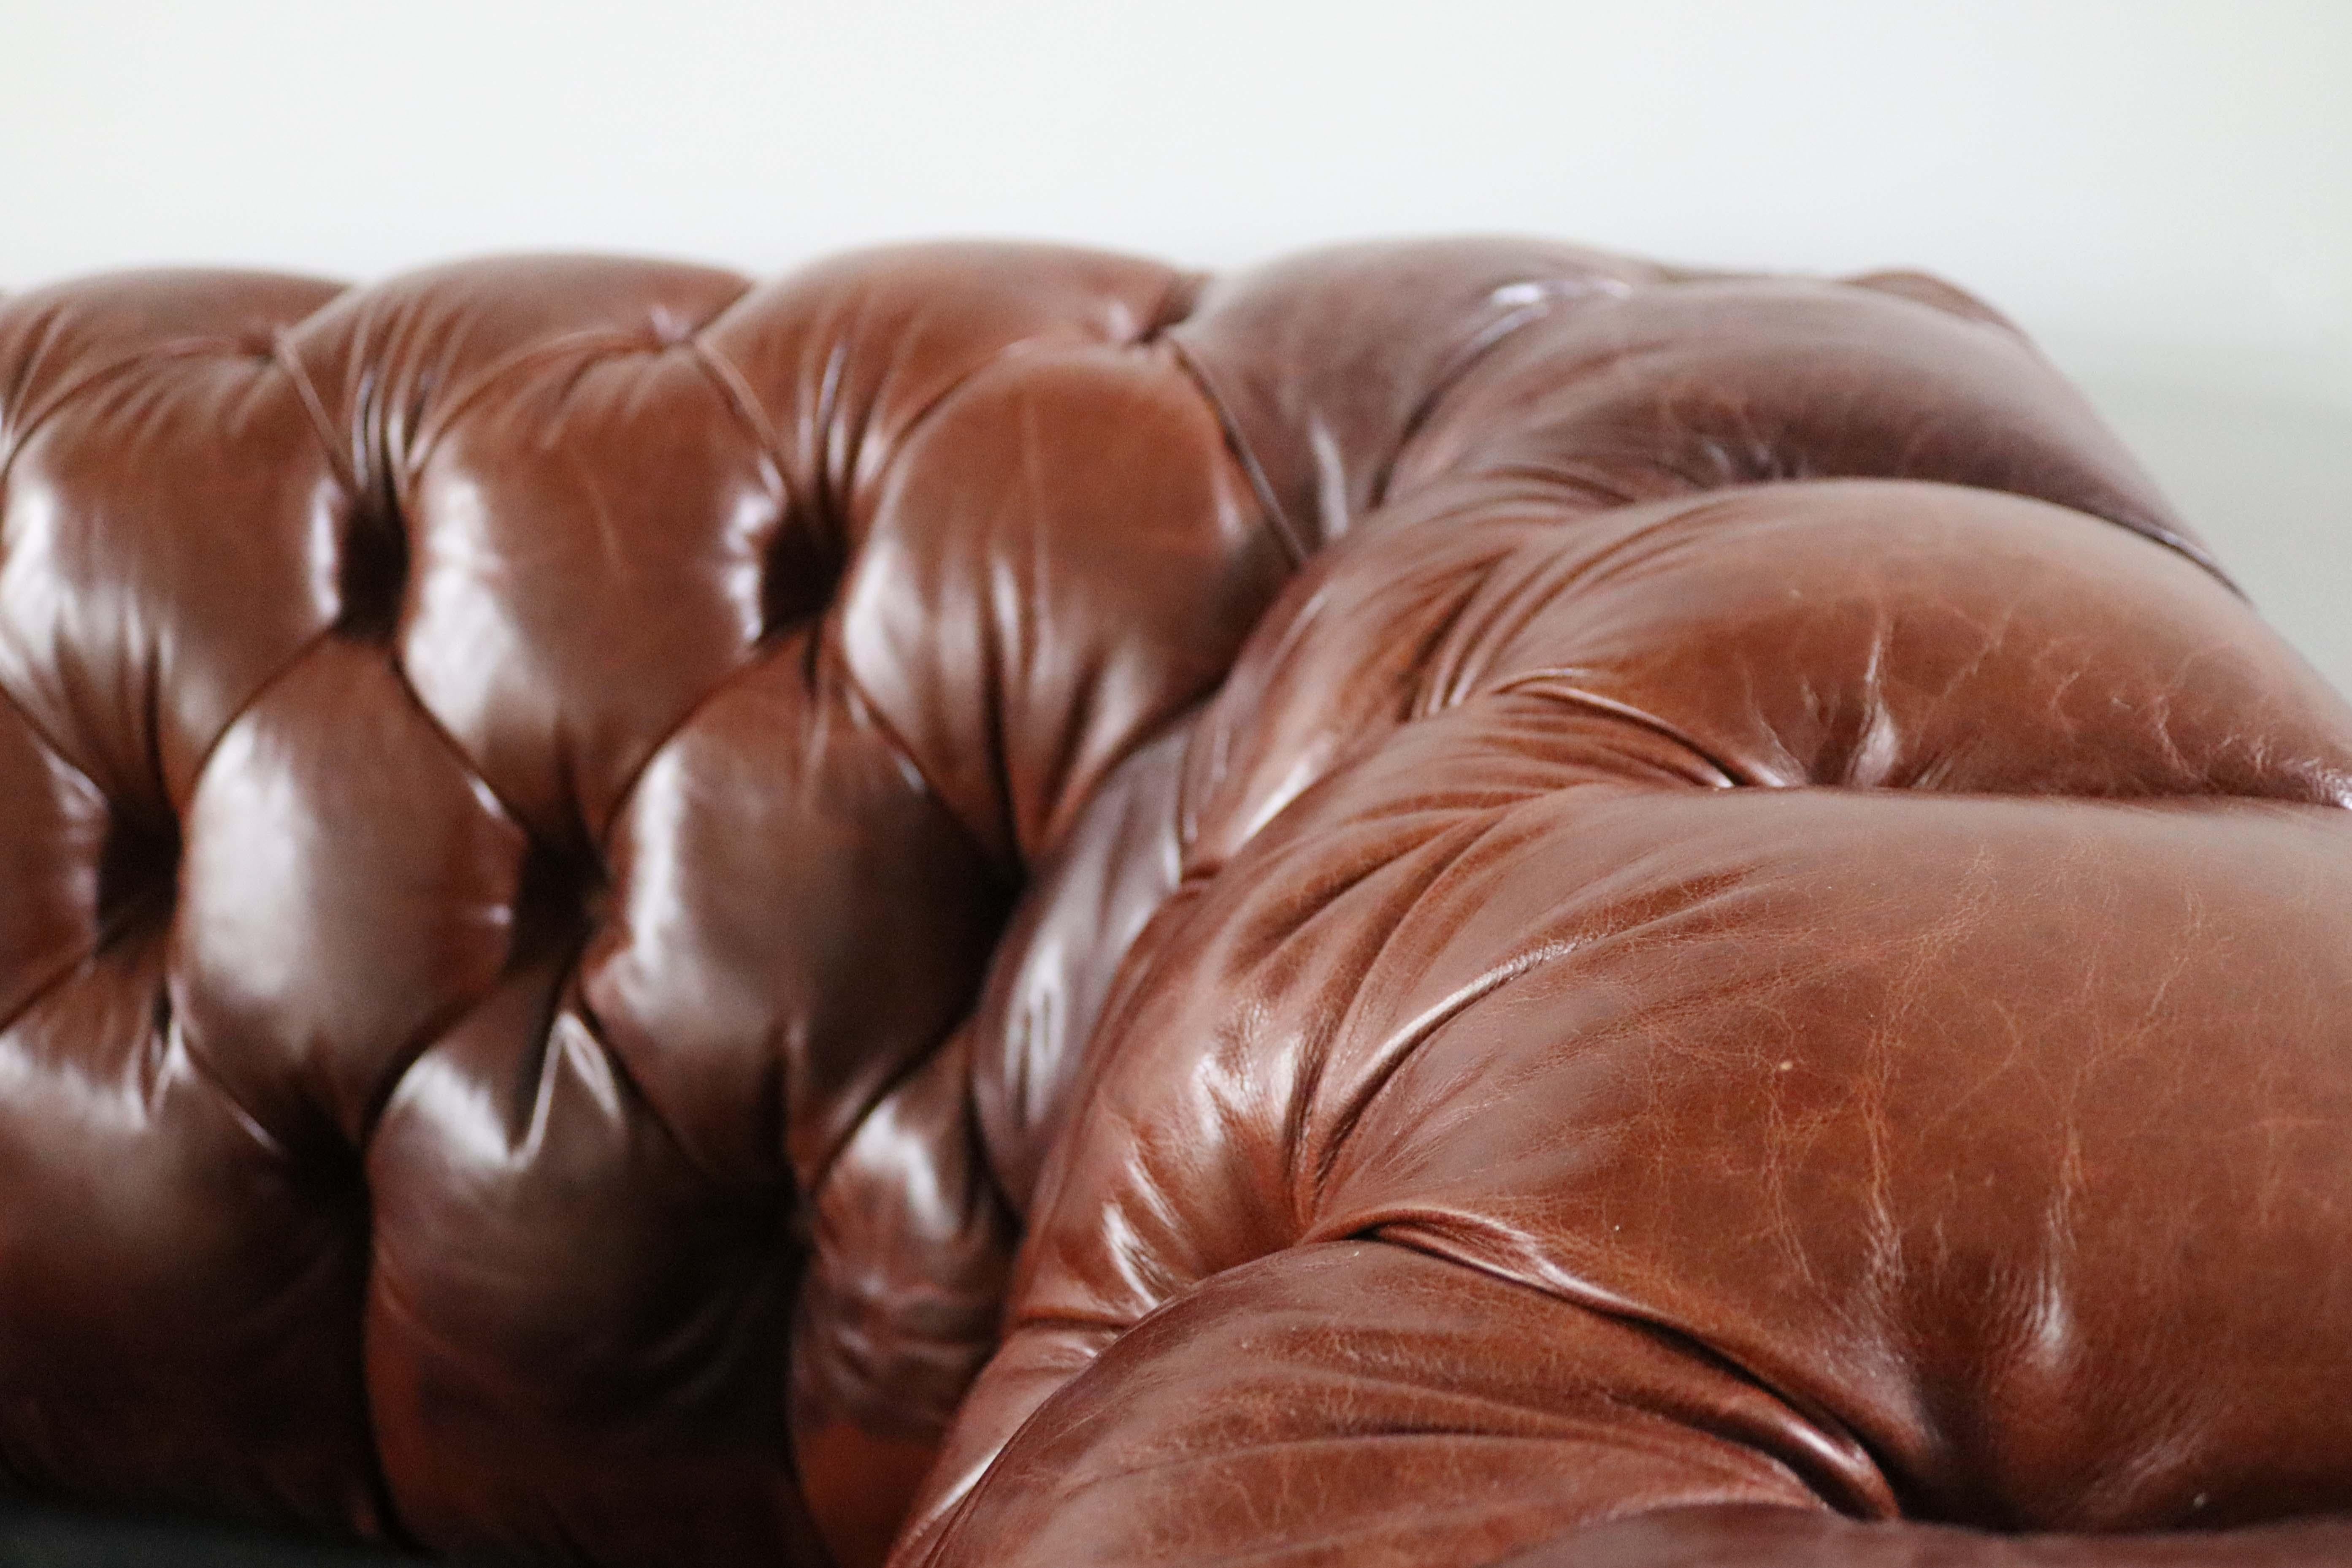 Up for sale is this luxurious leather, tufted sofa in a warm and natural brown. This sofa is truly both sophisticated and comfortable. The oversized scale makes this a showcase piece in any room and allows for extra guest seating. 

Dimensions: